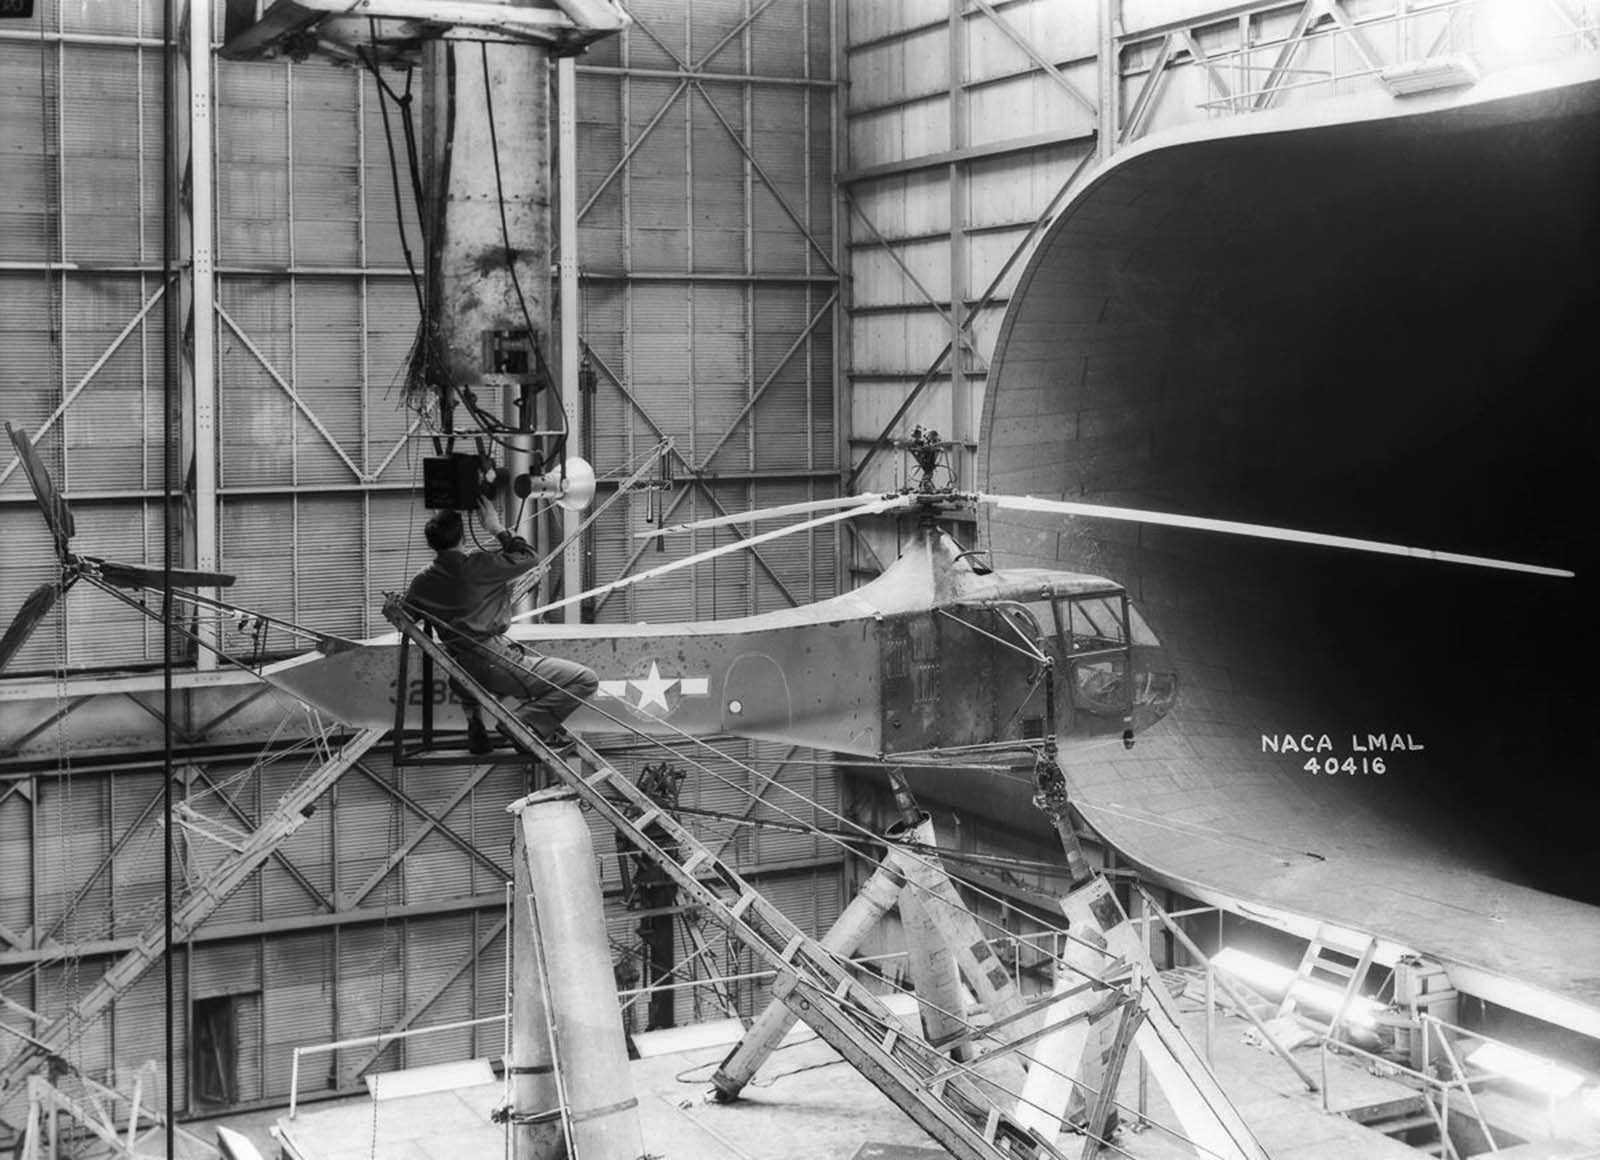 A Sikorsky YR-4B/HNS-1 helicopter, the first mass-produced chopper, in the 30 x 60 Full Scale Tunnel, 1944.